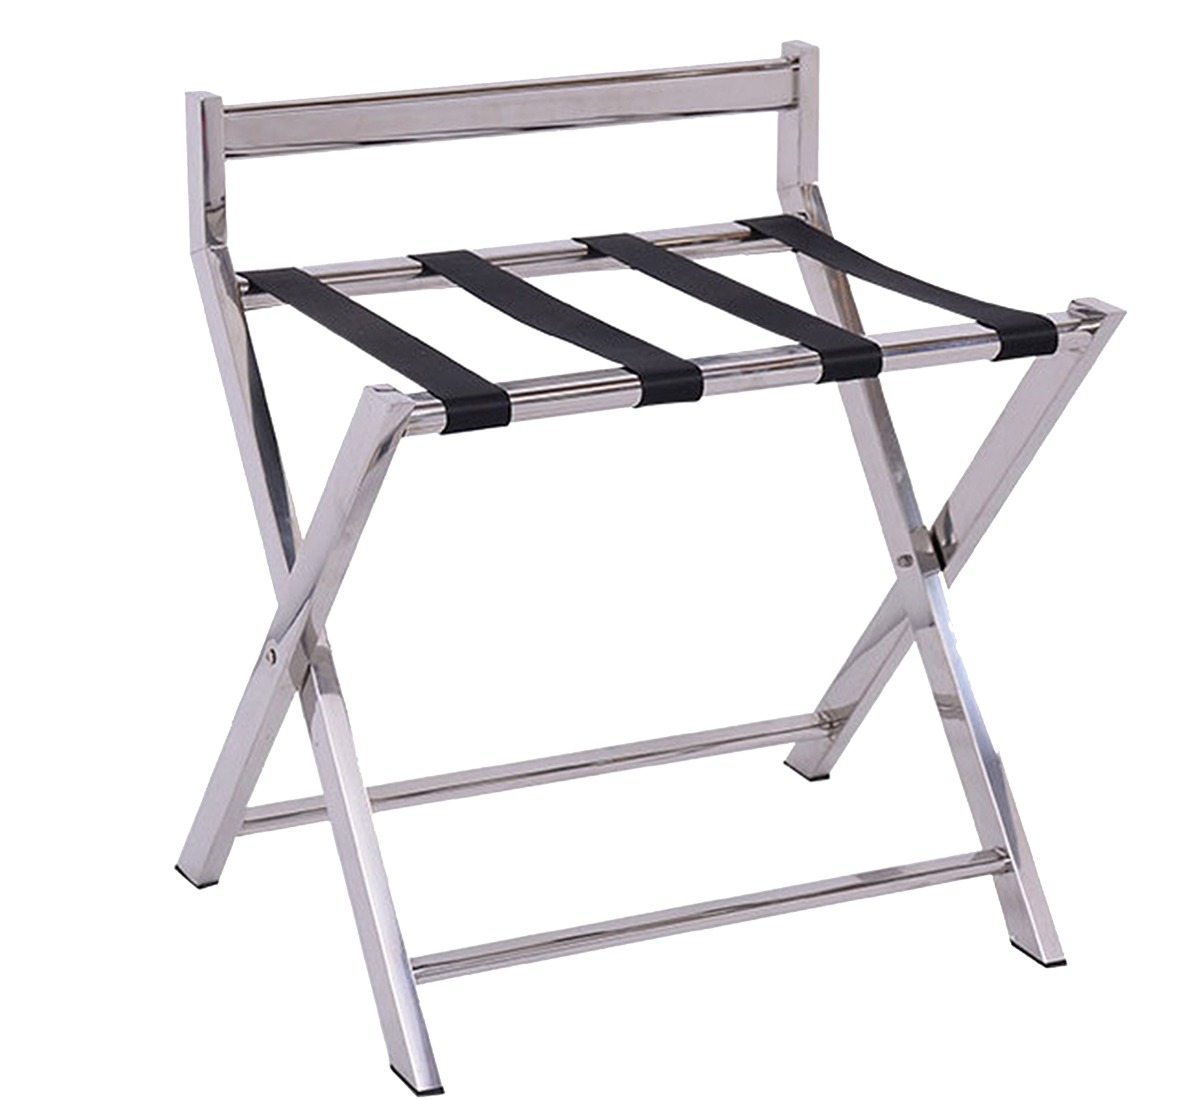 Foldable Luggage Rack with Back Support
